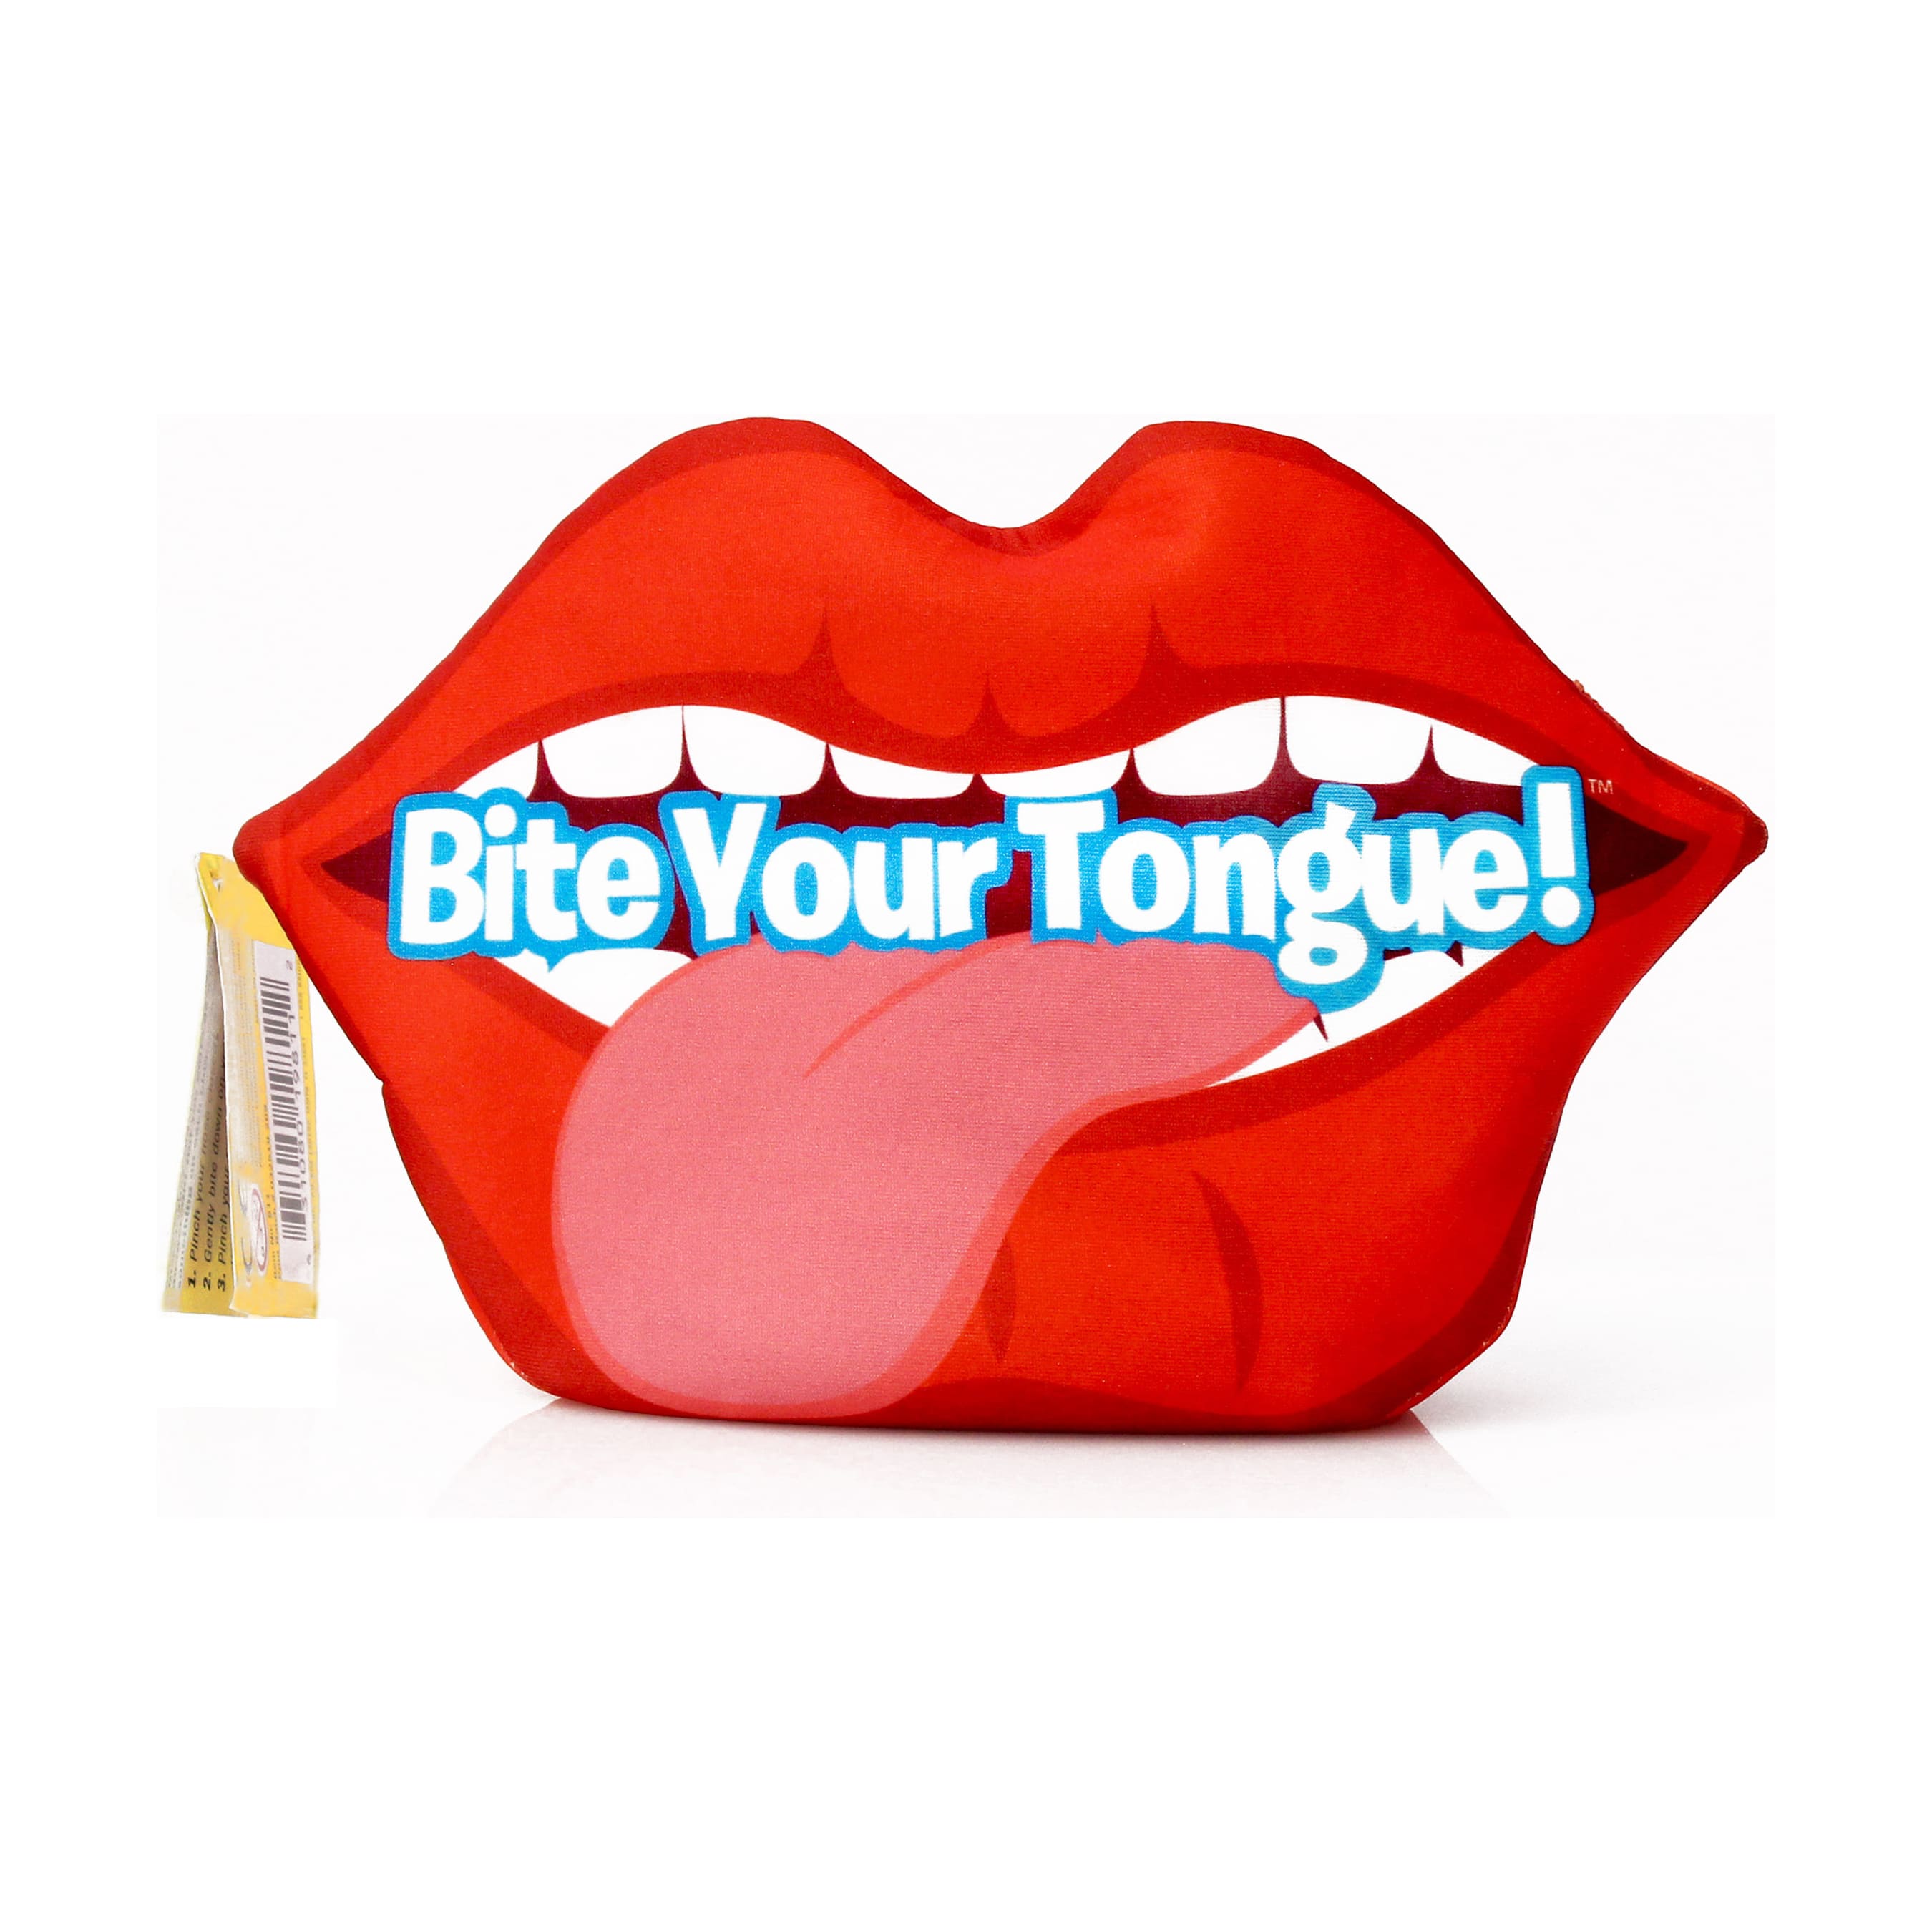 Bite Your Tongue!™ Game